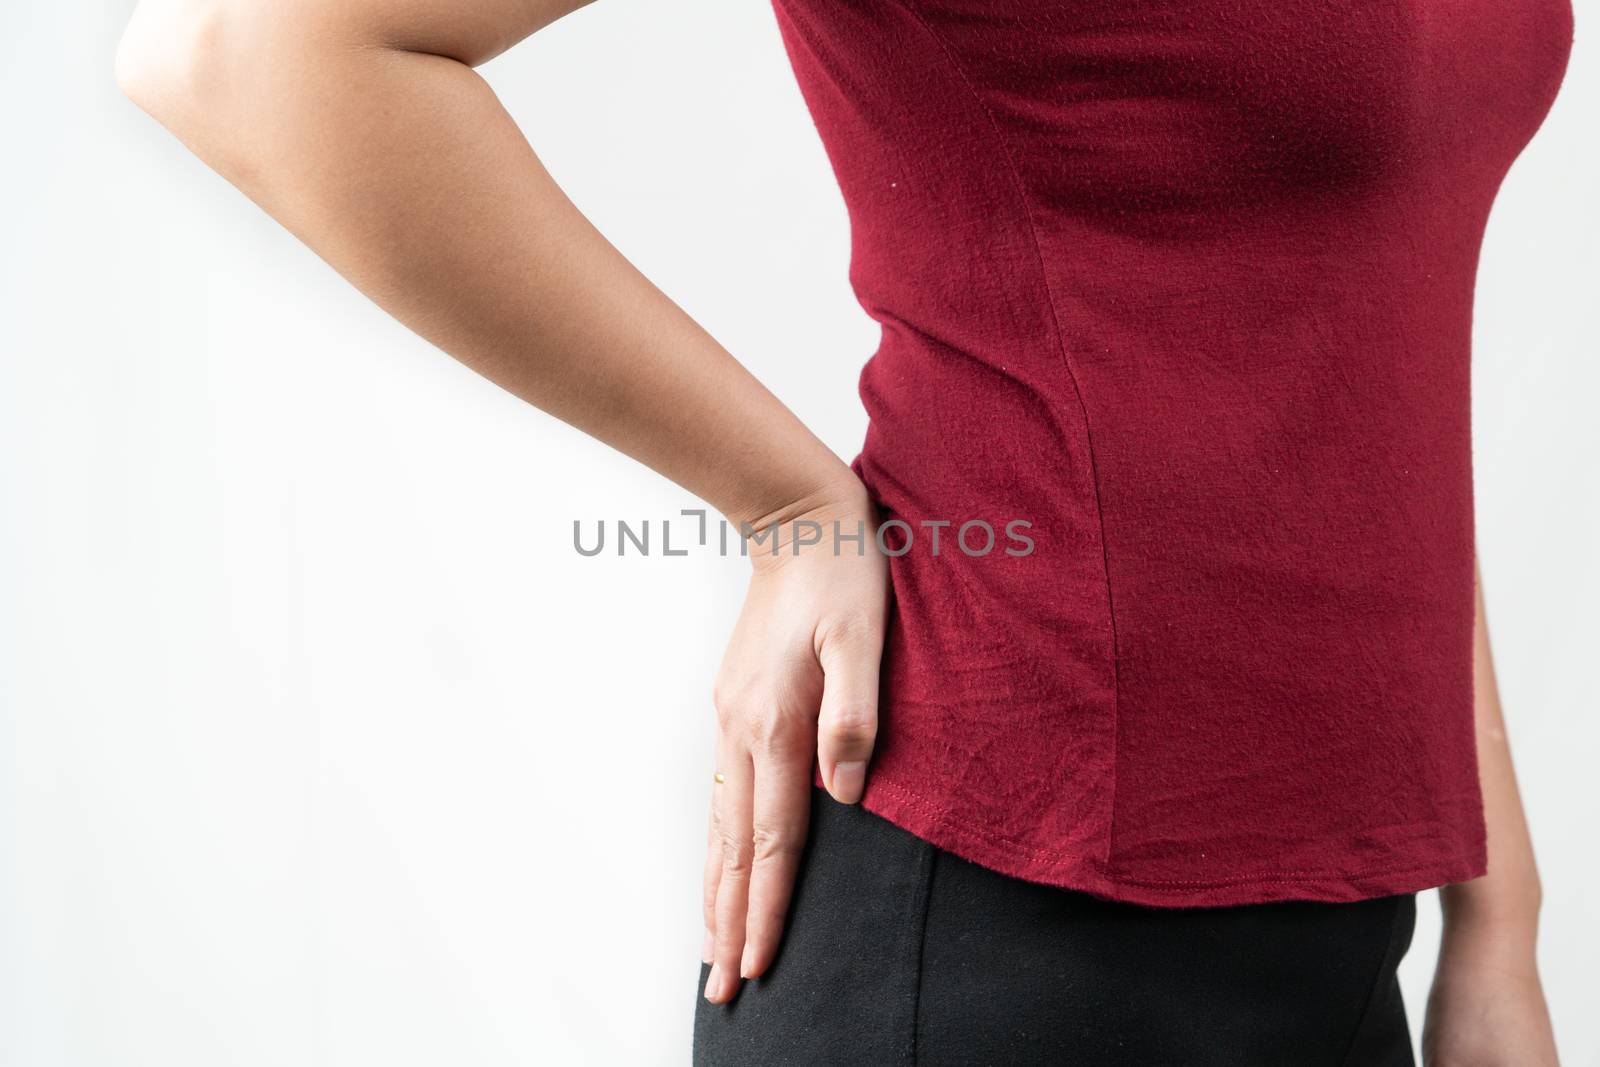 hip pain, women suffer from office syndrome. healthcare and medi by psodaz